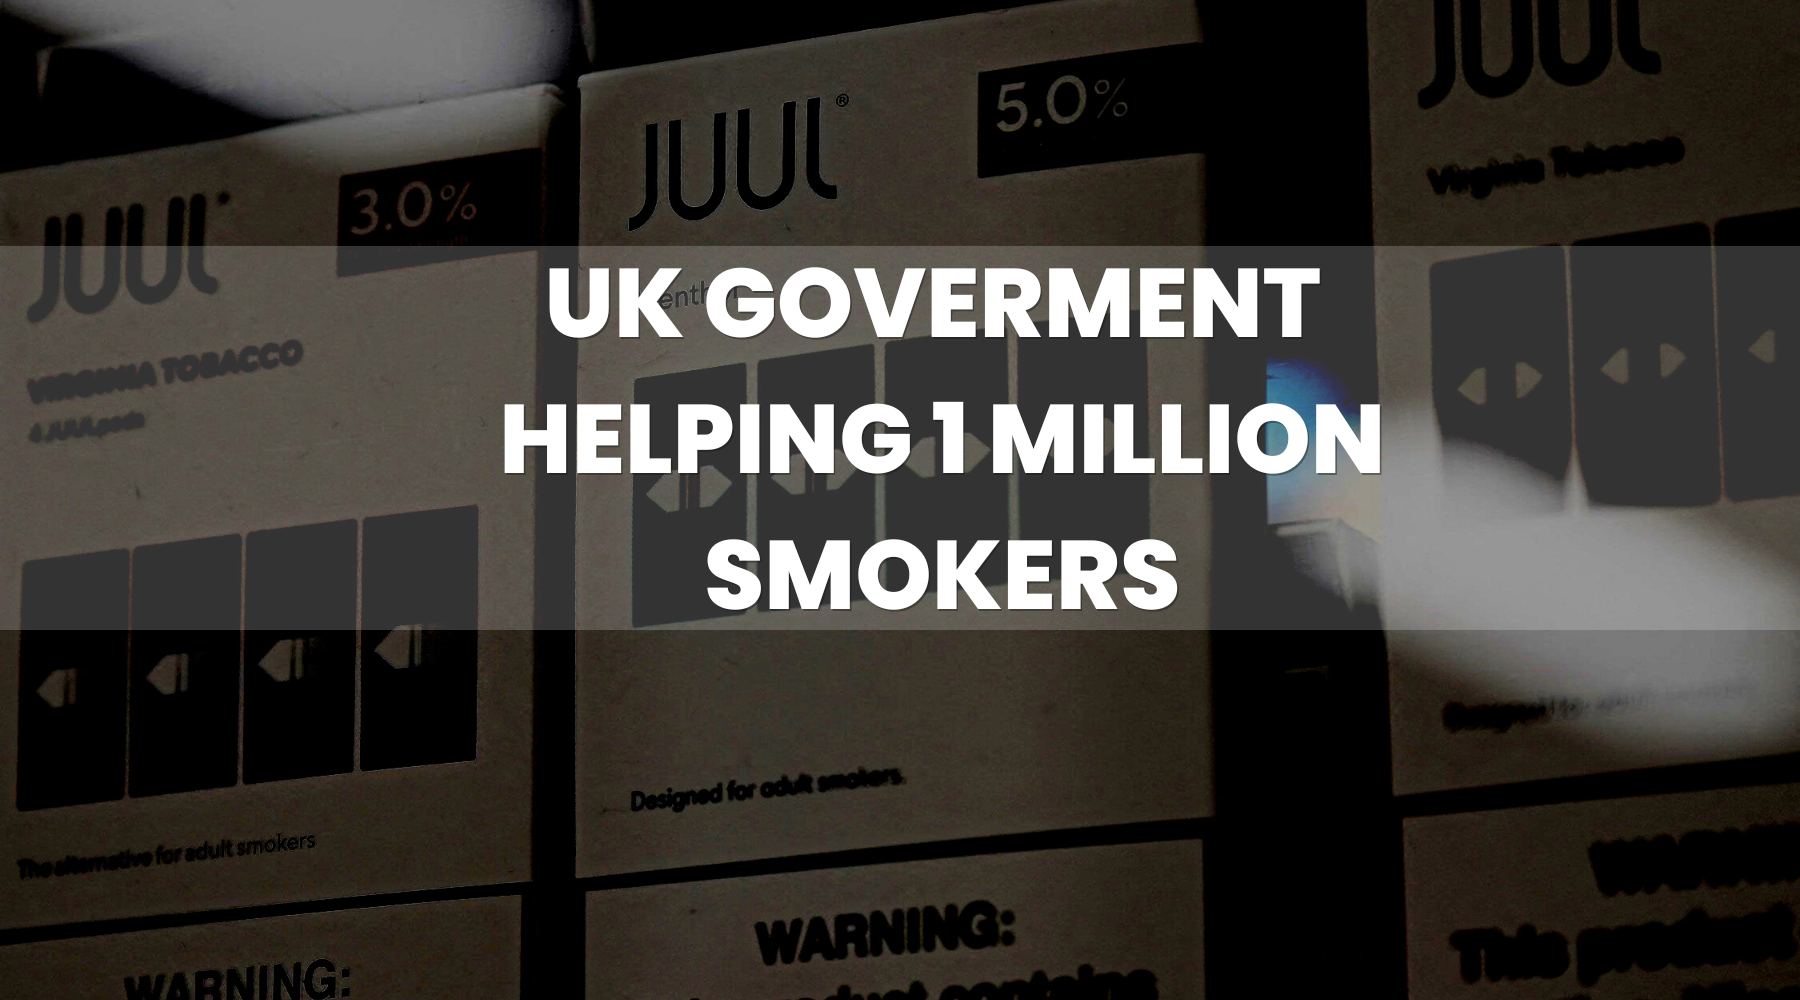 UK Government Offers FREE Vapes to Help 1 Million Smokers Quit